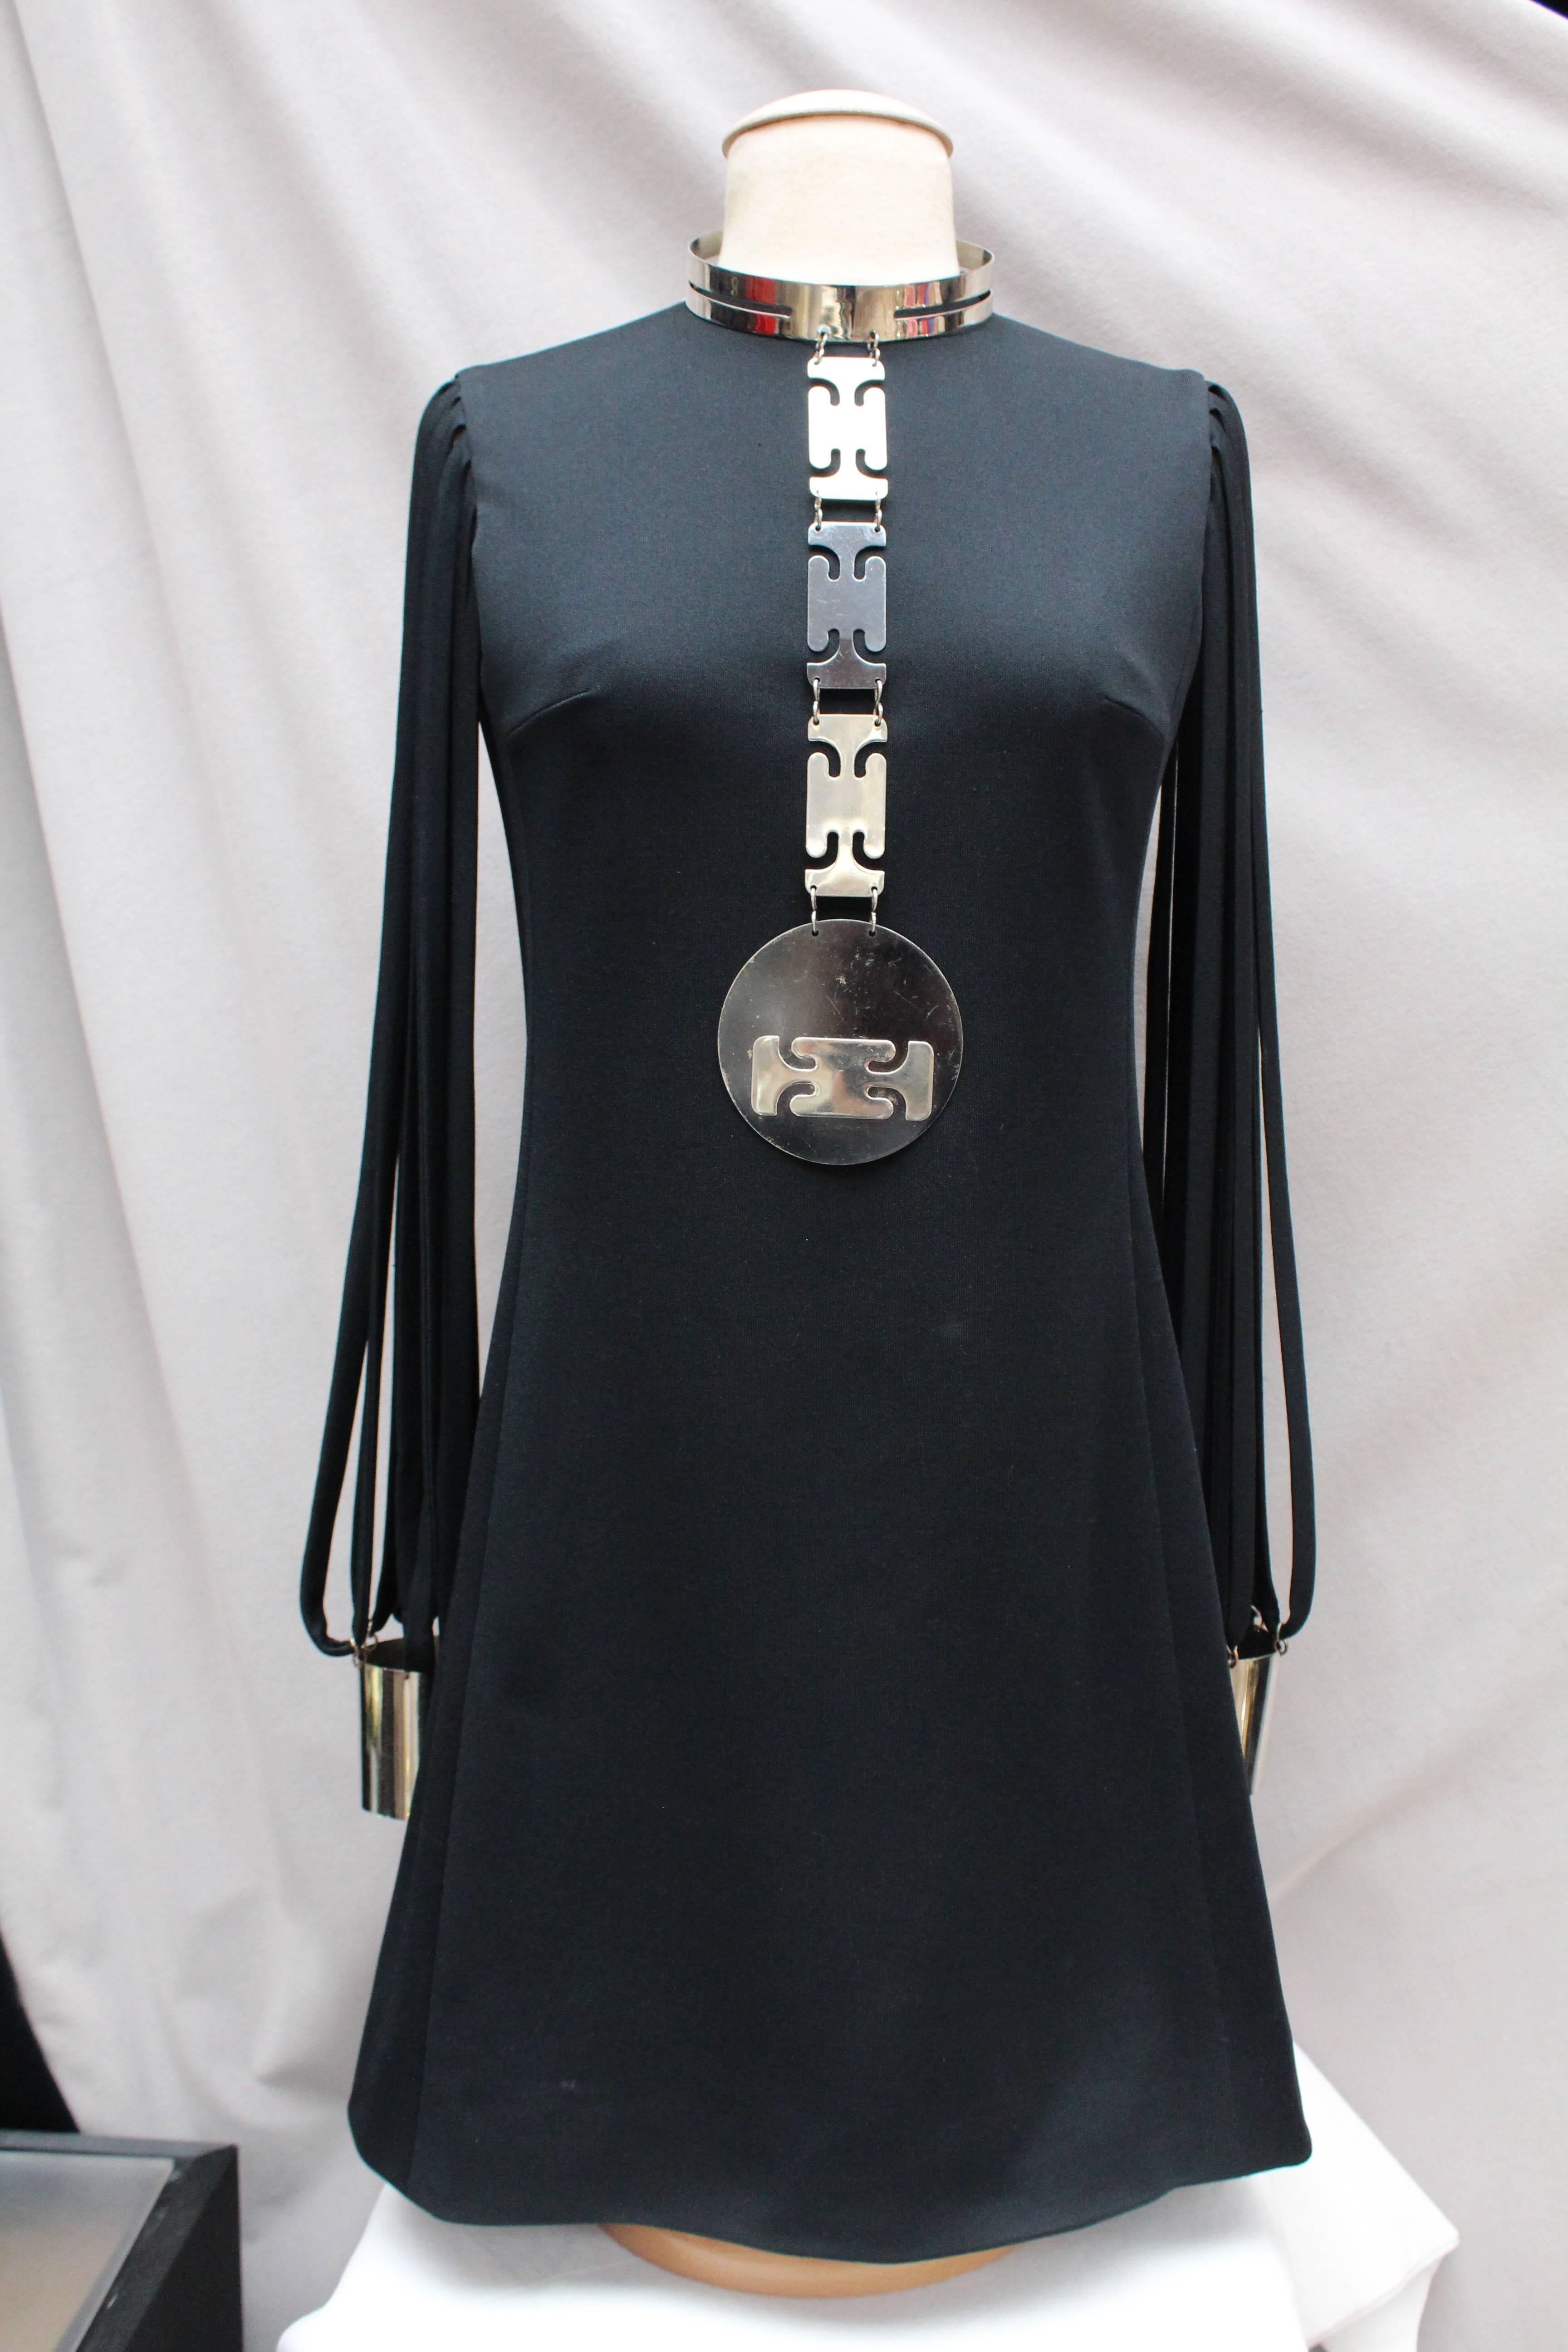 PIERRE CARDIN (Attributed to – Made in France) Little black jersey dress with trapezoid cut, round collar and “couture” long sleeves. The sleeves are composed of thin straps revealing the arms from shoulder to cuffs. The straps are linked together